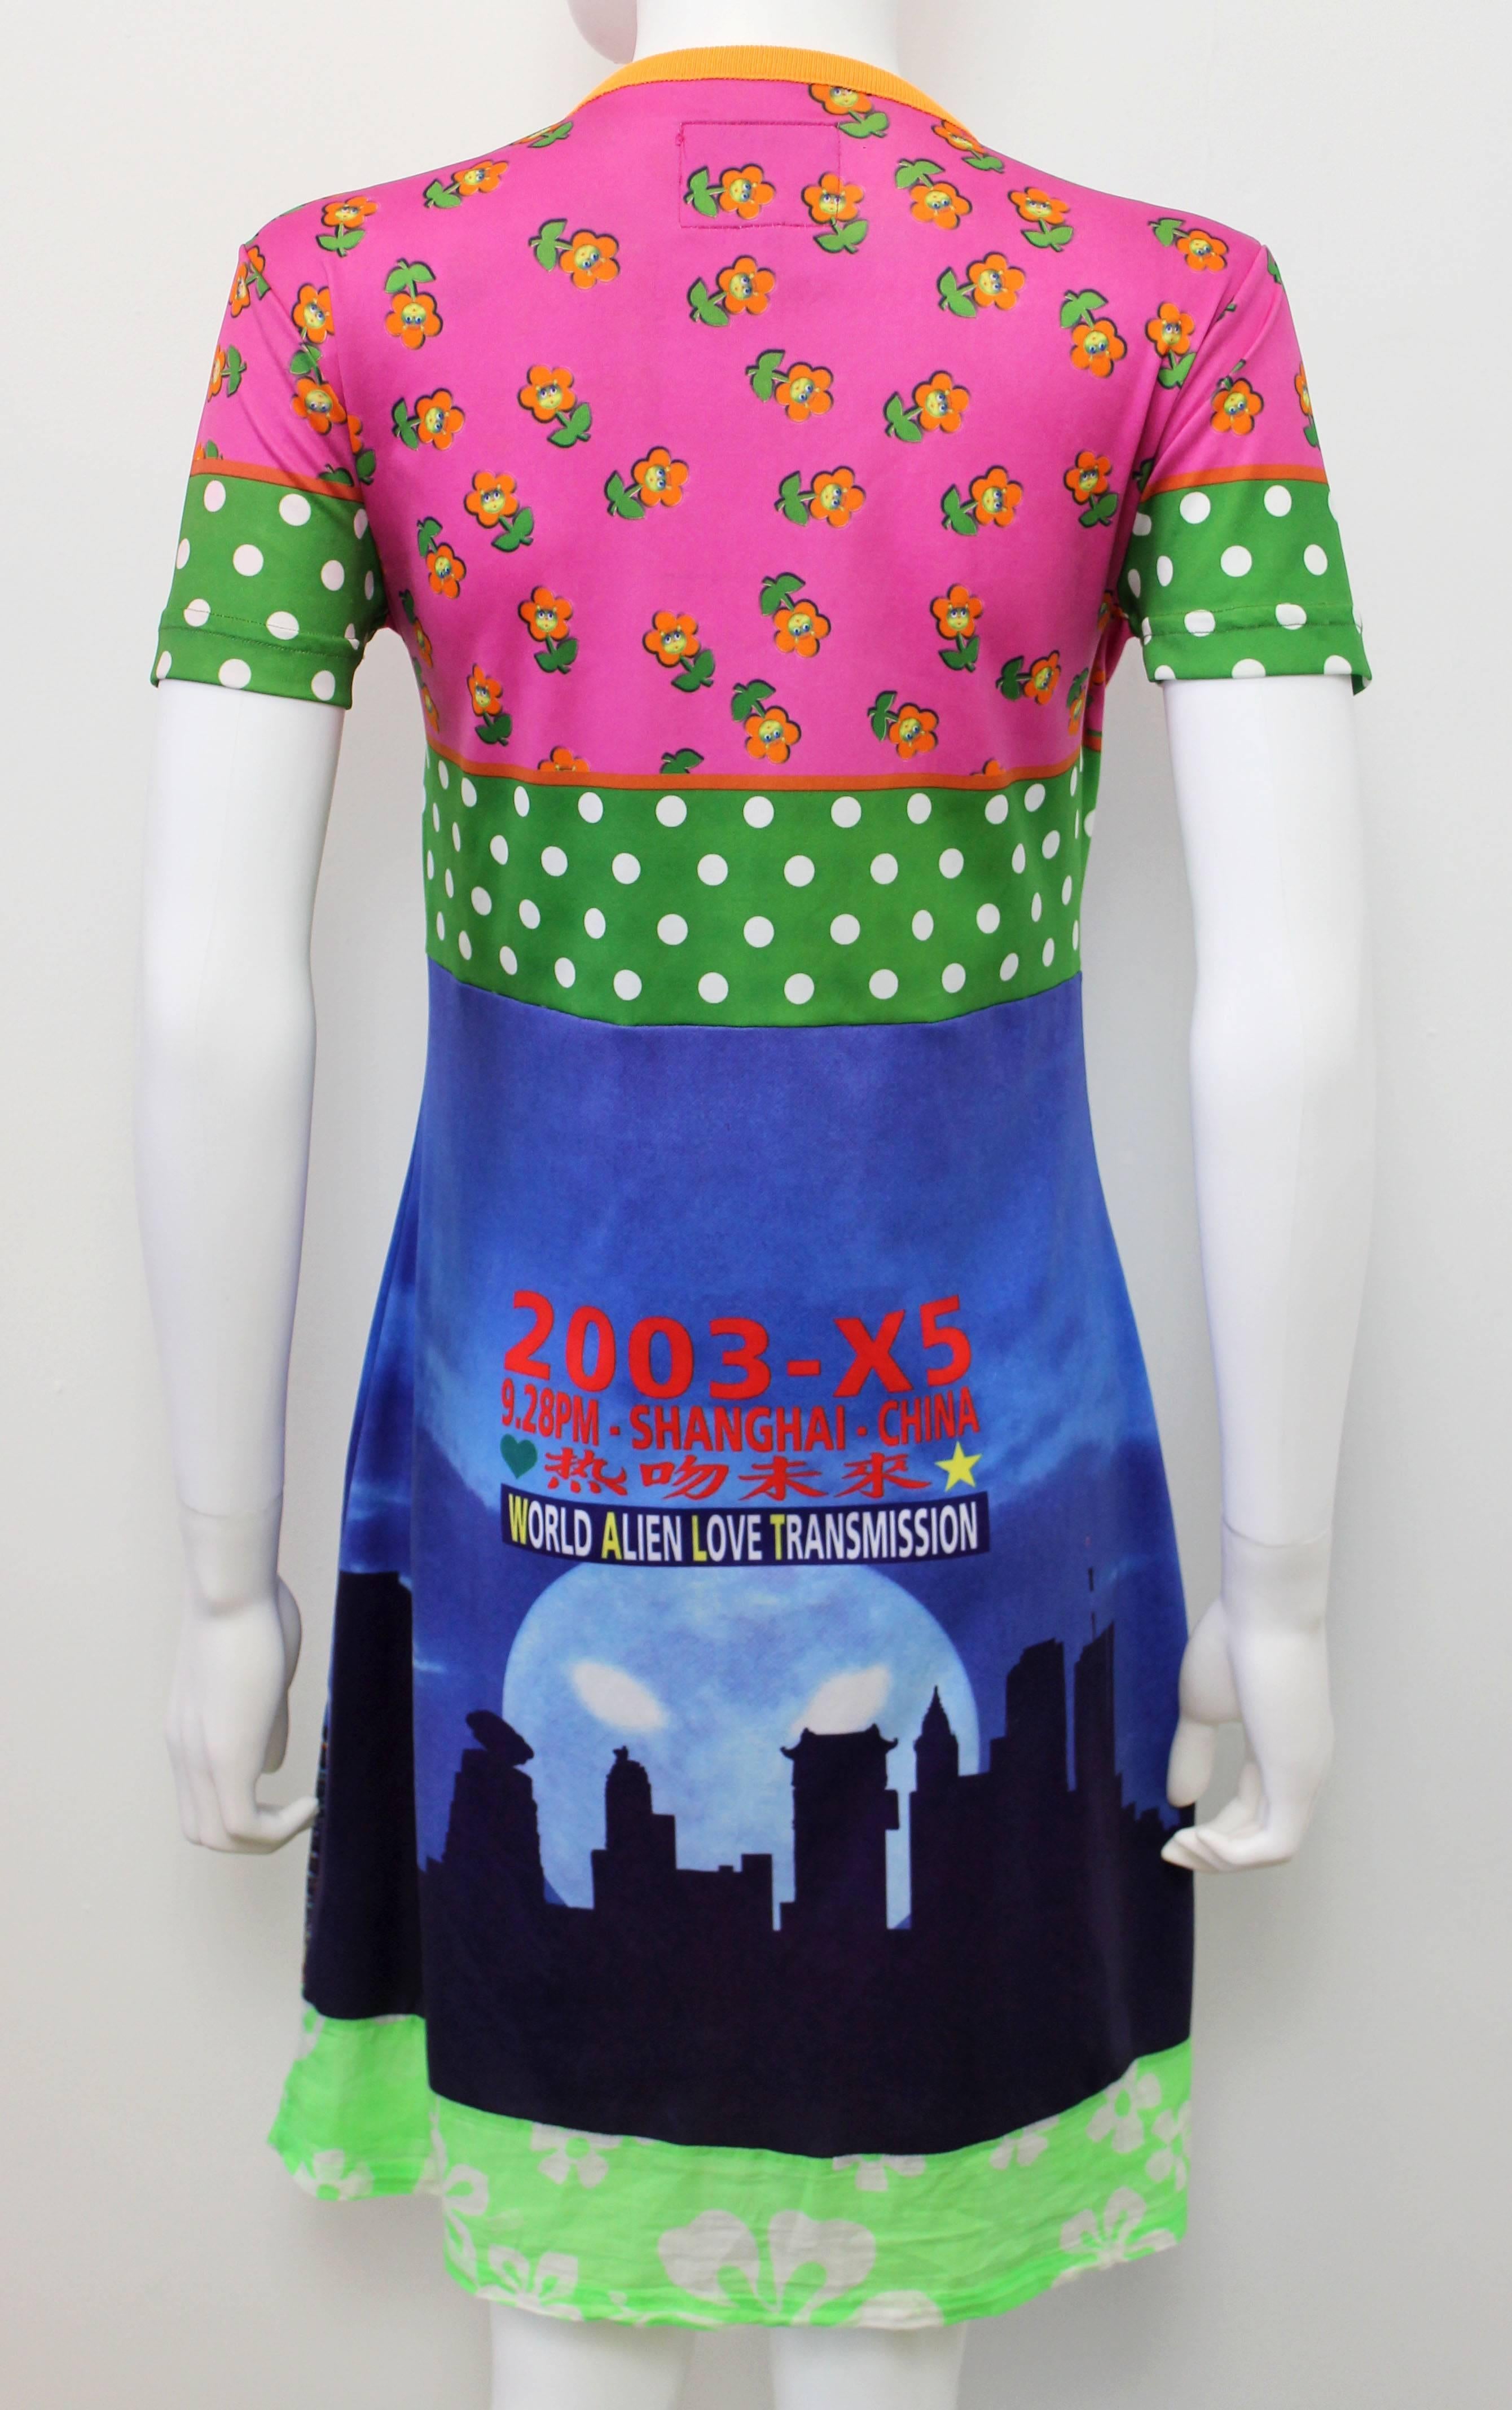 This 2003 short sleeve printed playful jersey dress features a contrasting mix of different printed panels, a pink flower print, green polka dot print, a neon hibiscus printed cotton panel and a detailed digital printed image of a Chinese skyline